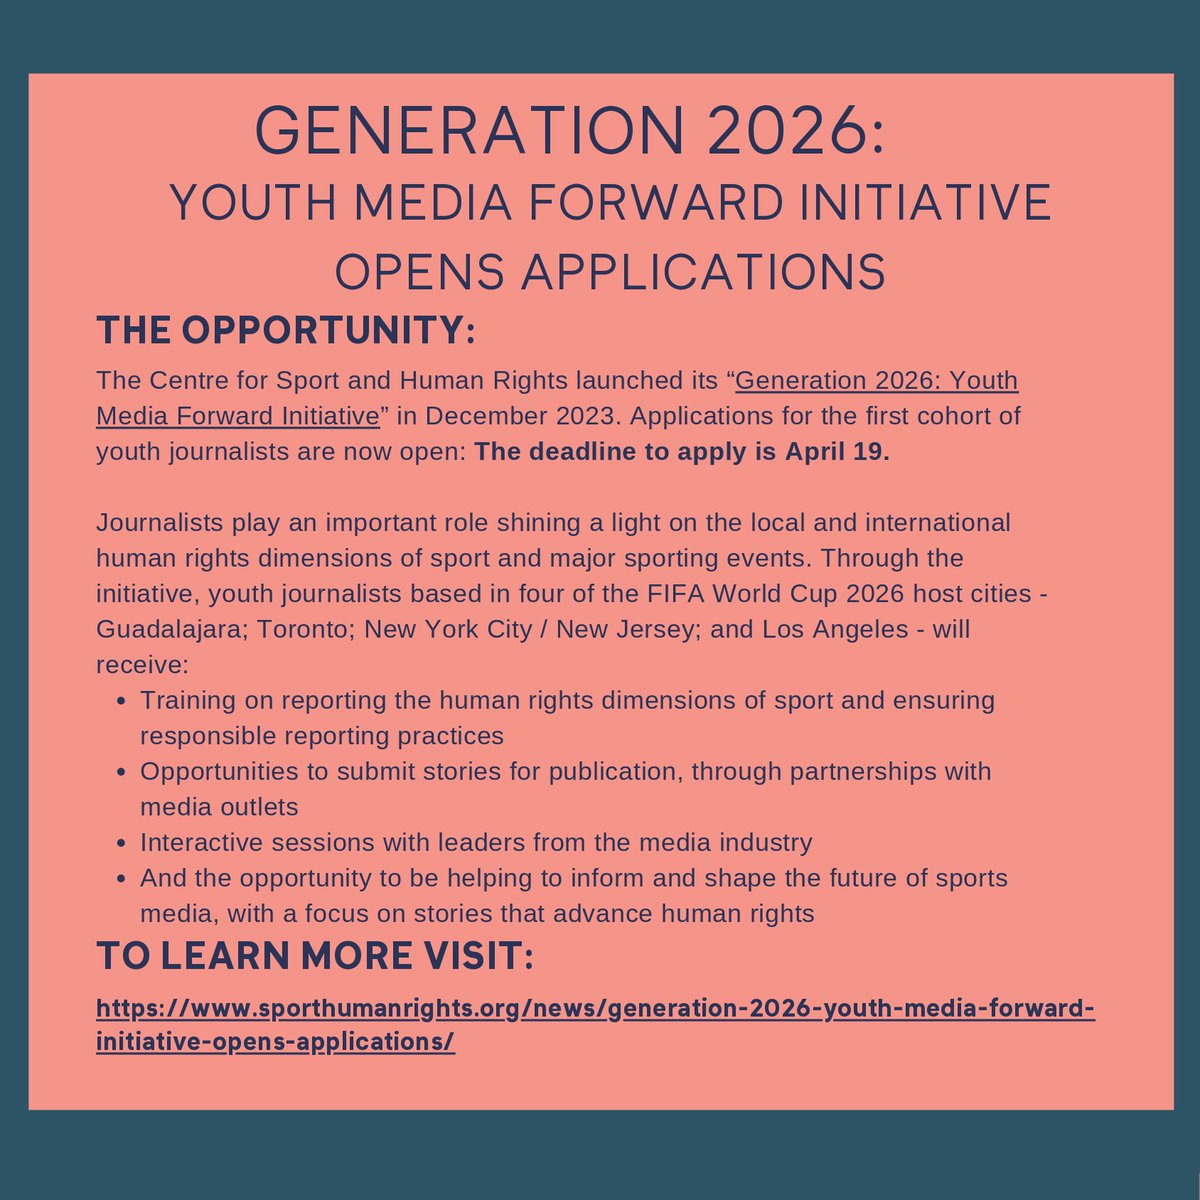 The Centre for Sport and Human Rights launched its “Generation 2026: Youth Media Forward Initiative” in December 2023. Applications for the first cohort of youth journalists are now open through April 19th. #lacityparks #parkproudla